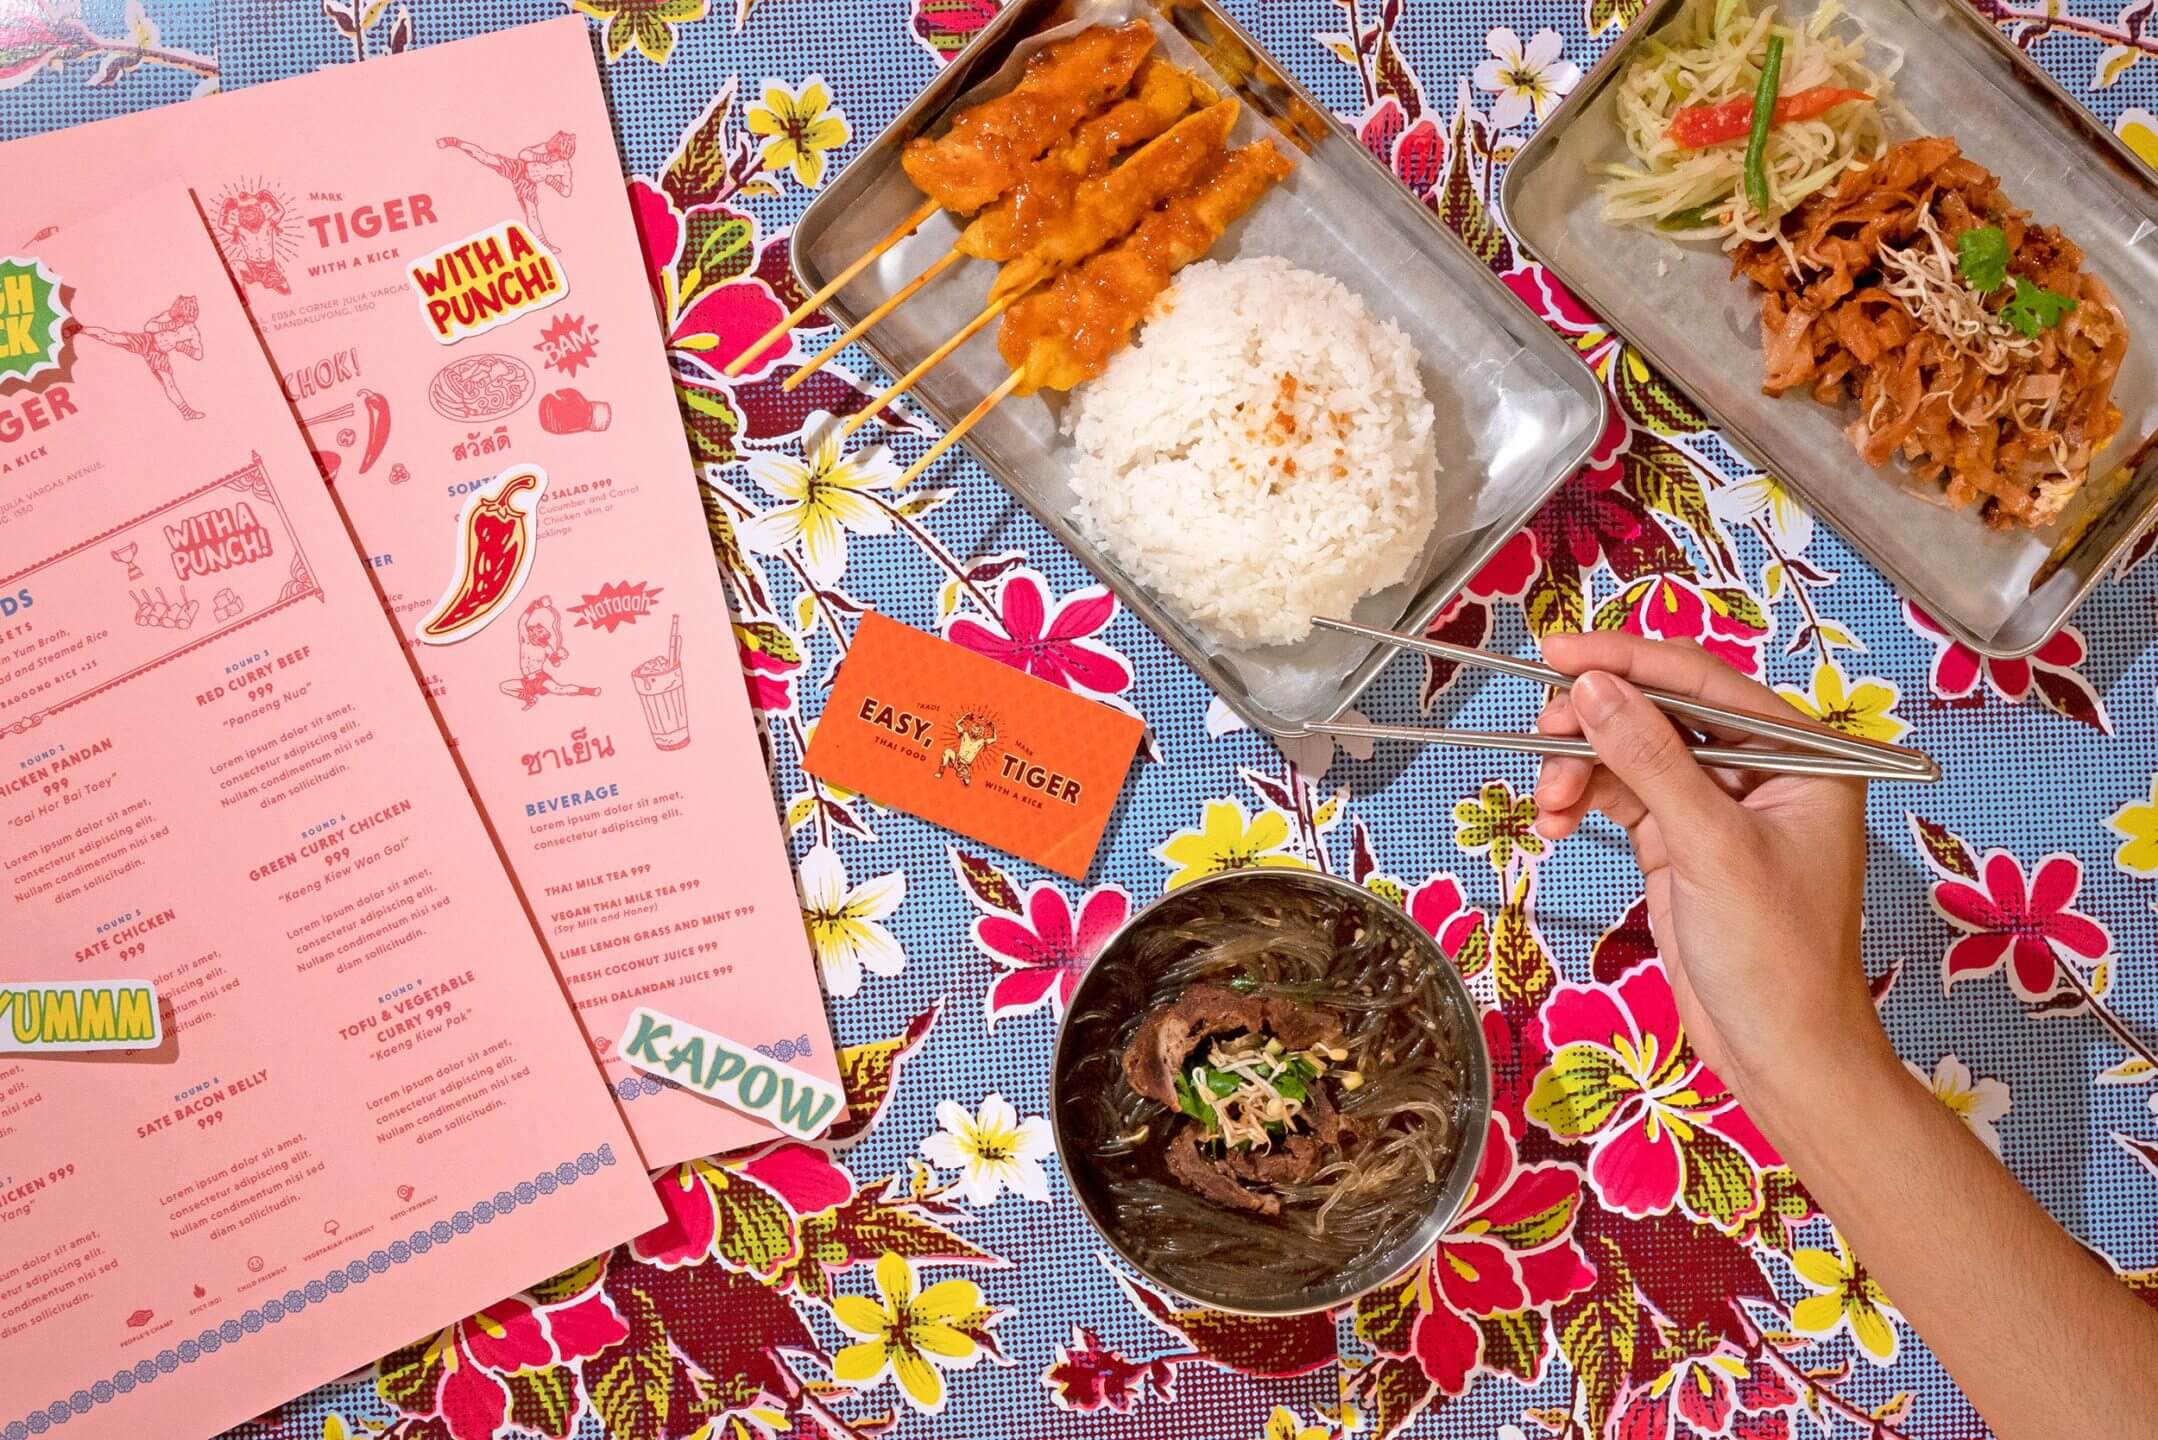 Lifestyle photography of food and the menu design for Thai food and beverage brand Easy Tiger